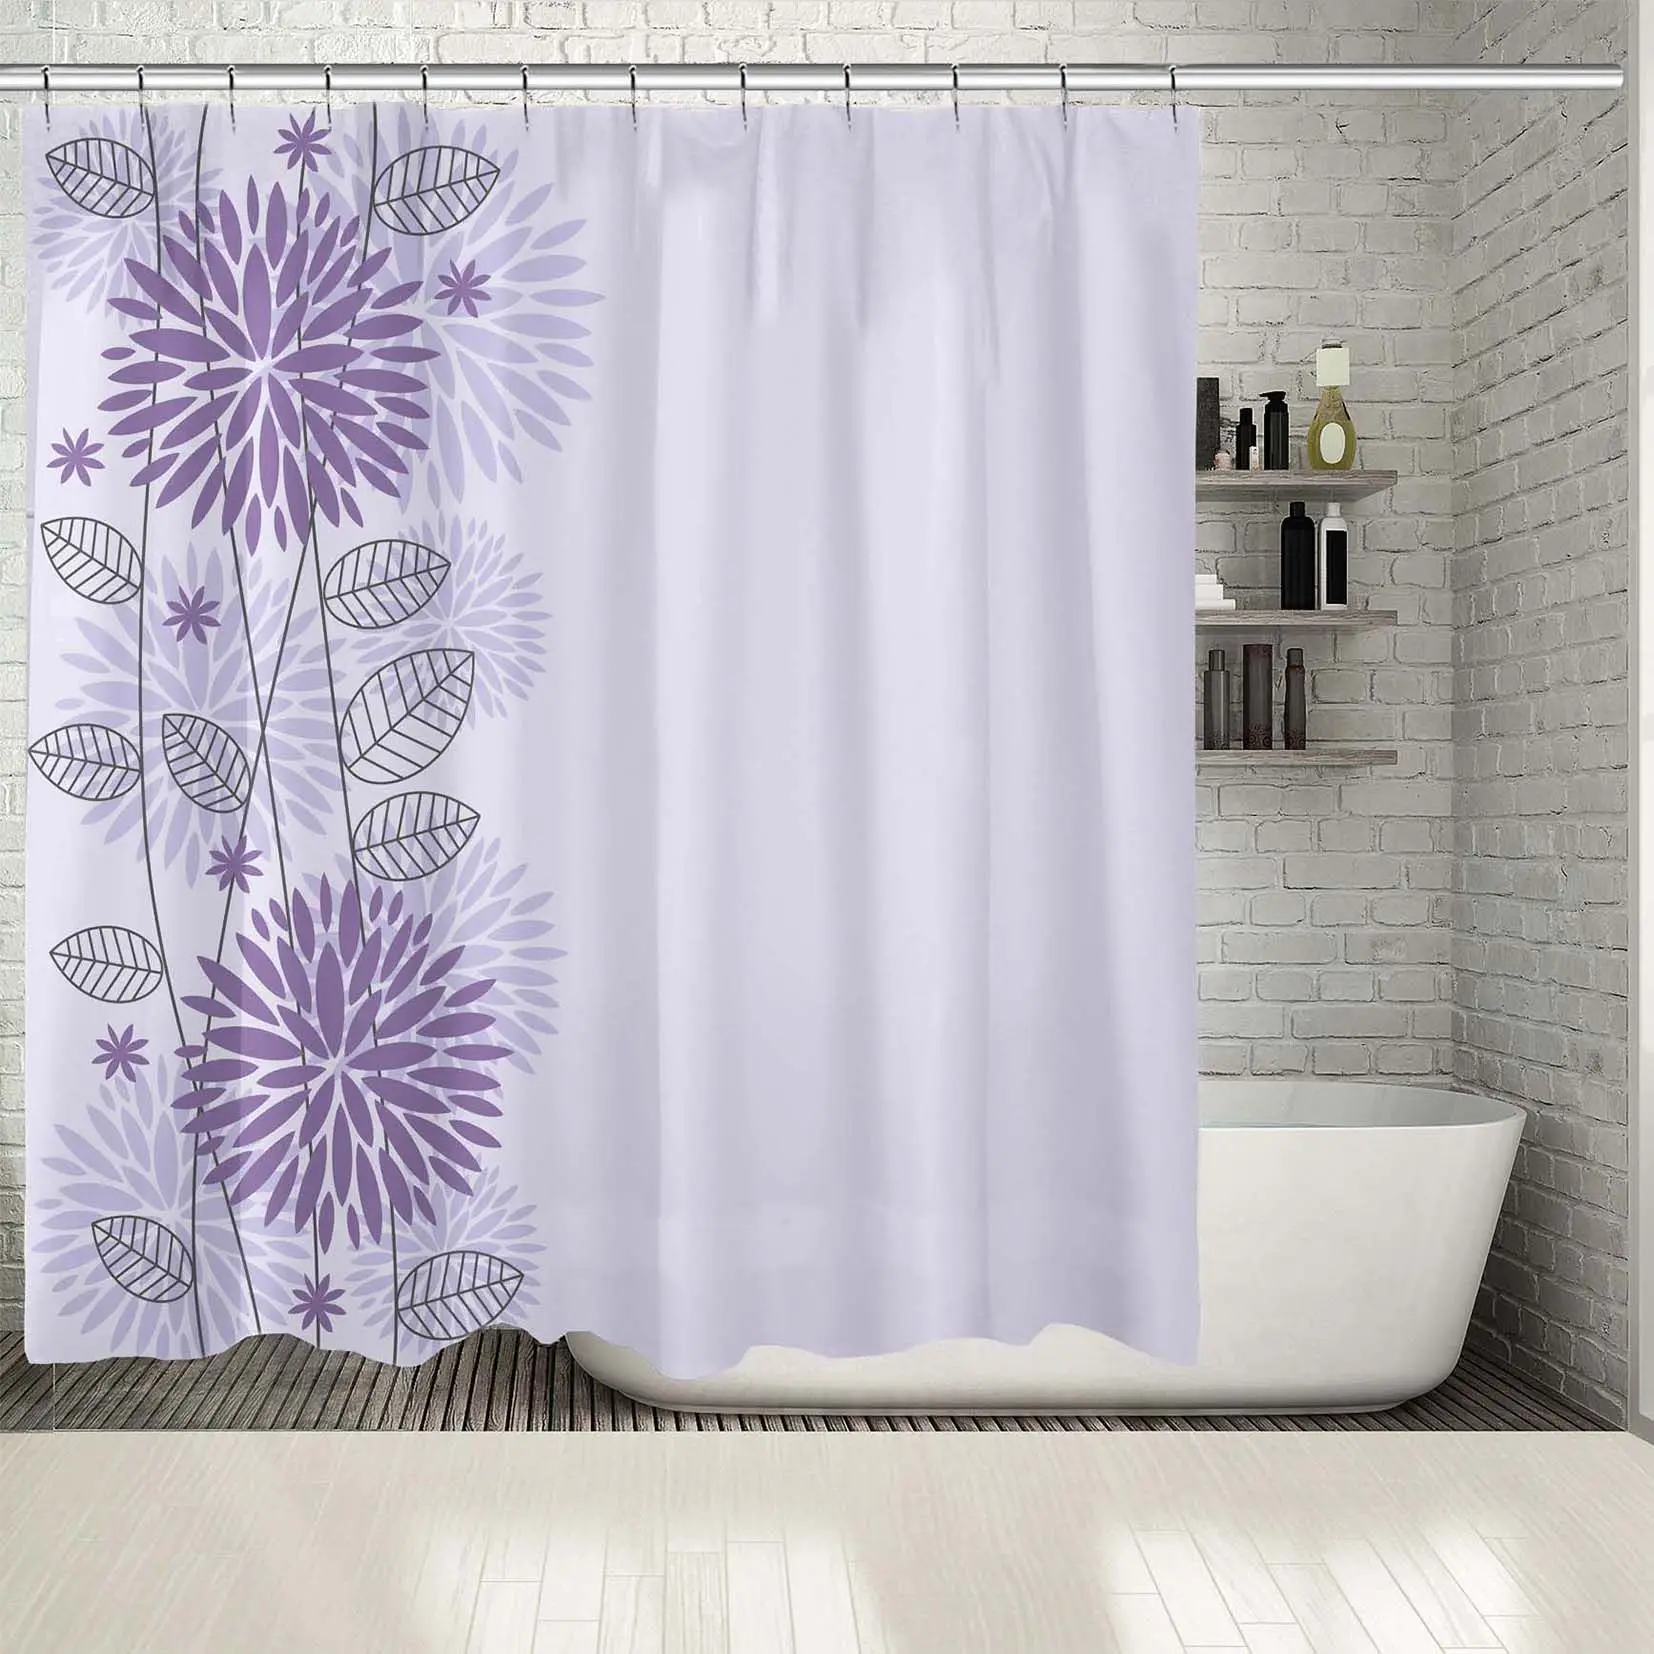 

Shower Curtain Flowers Blooms and Leaves Wildflowers in Summer Nature Floral Modern Artwork Purple Lilac Gray